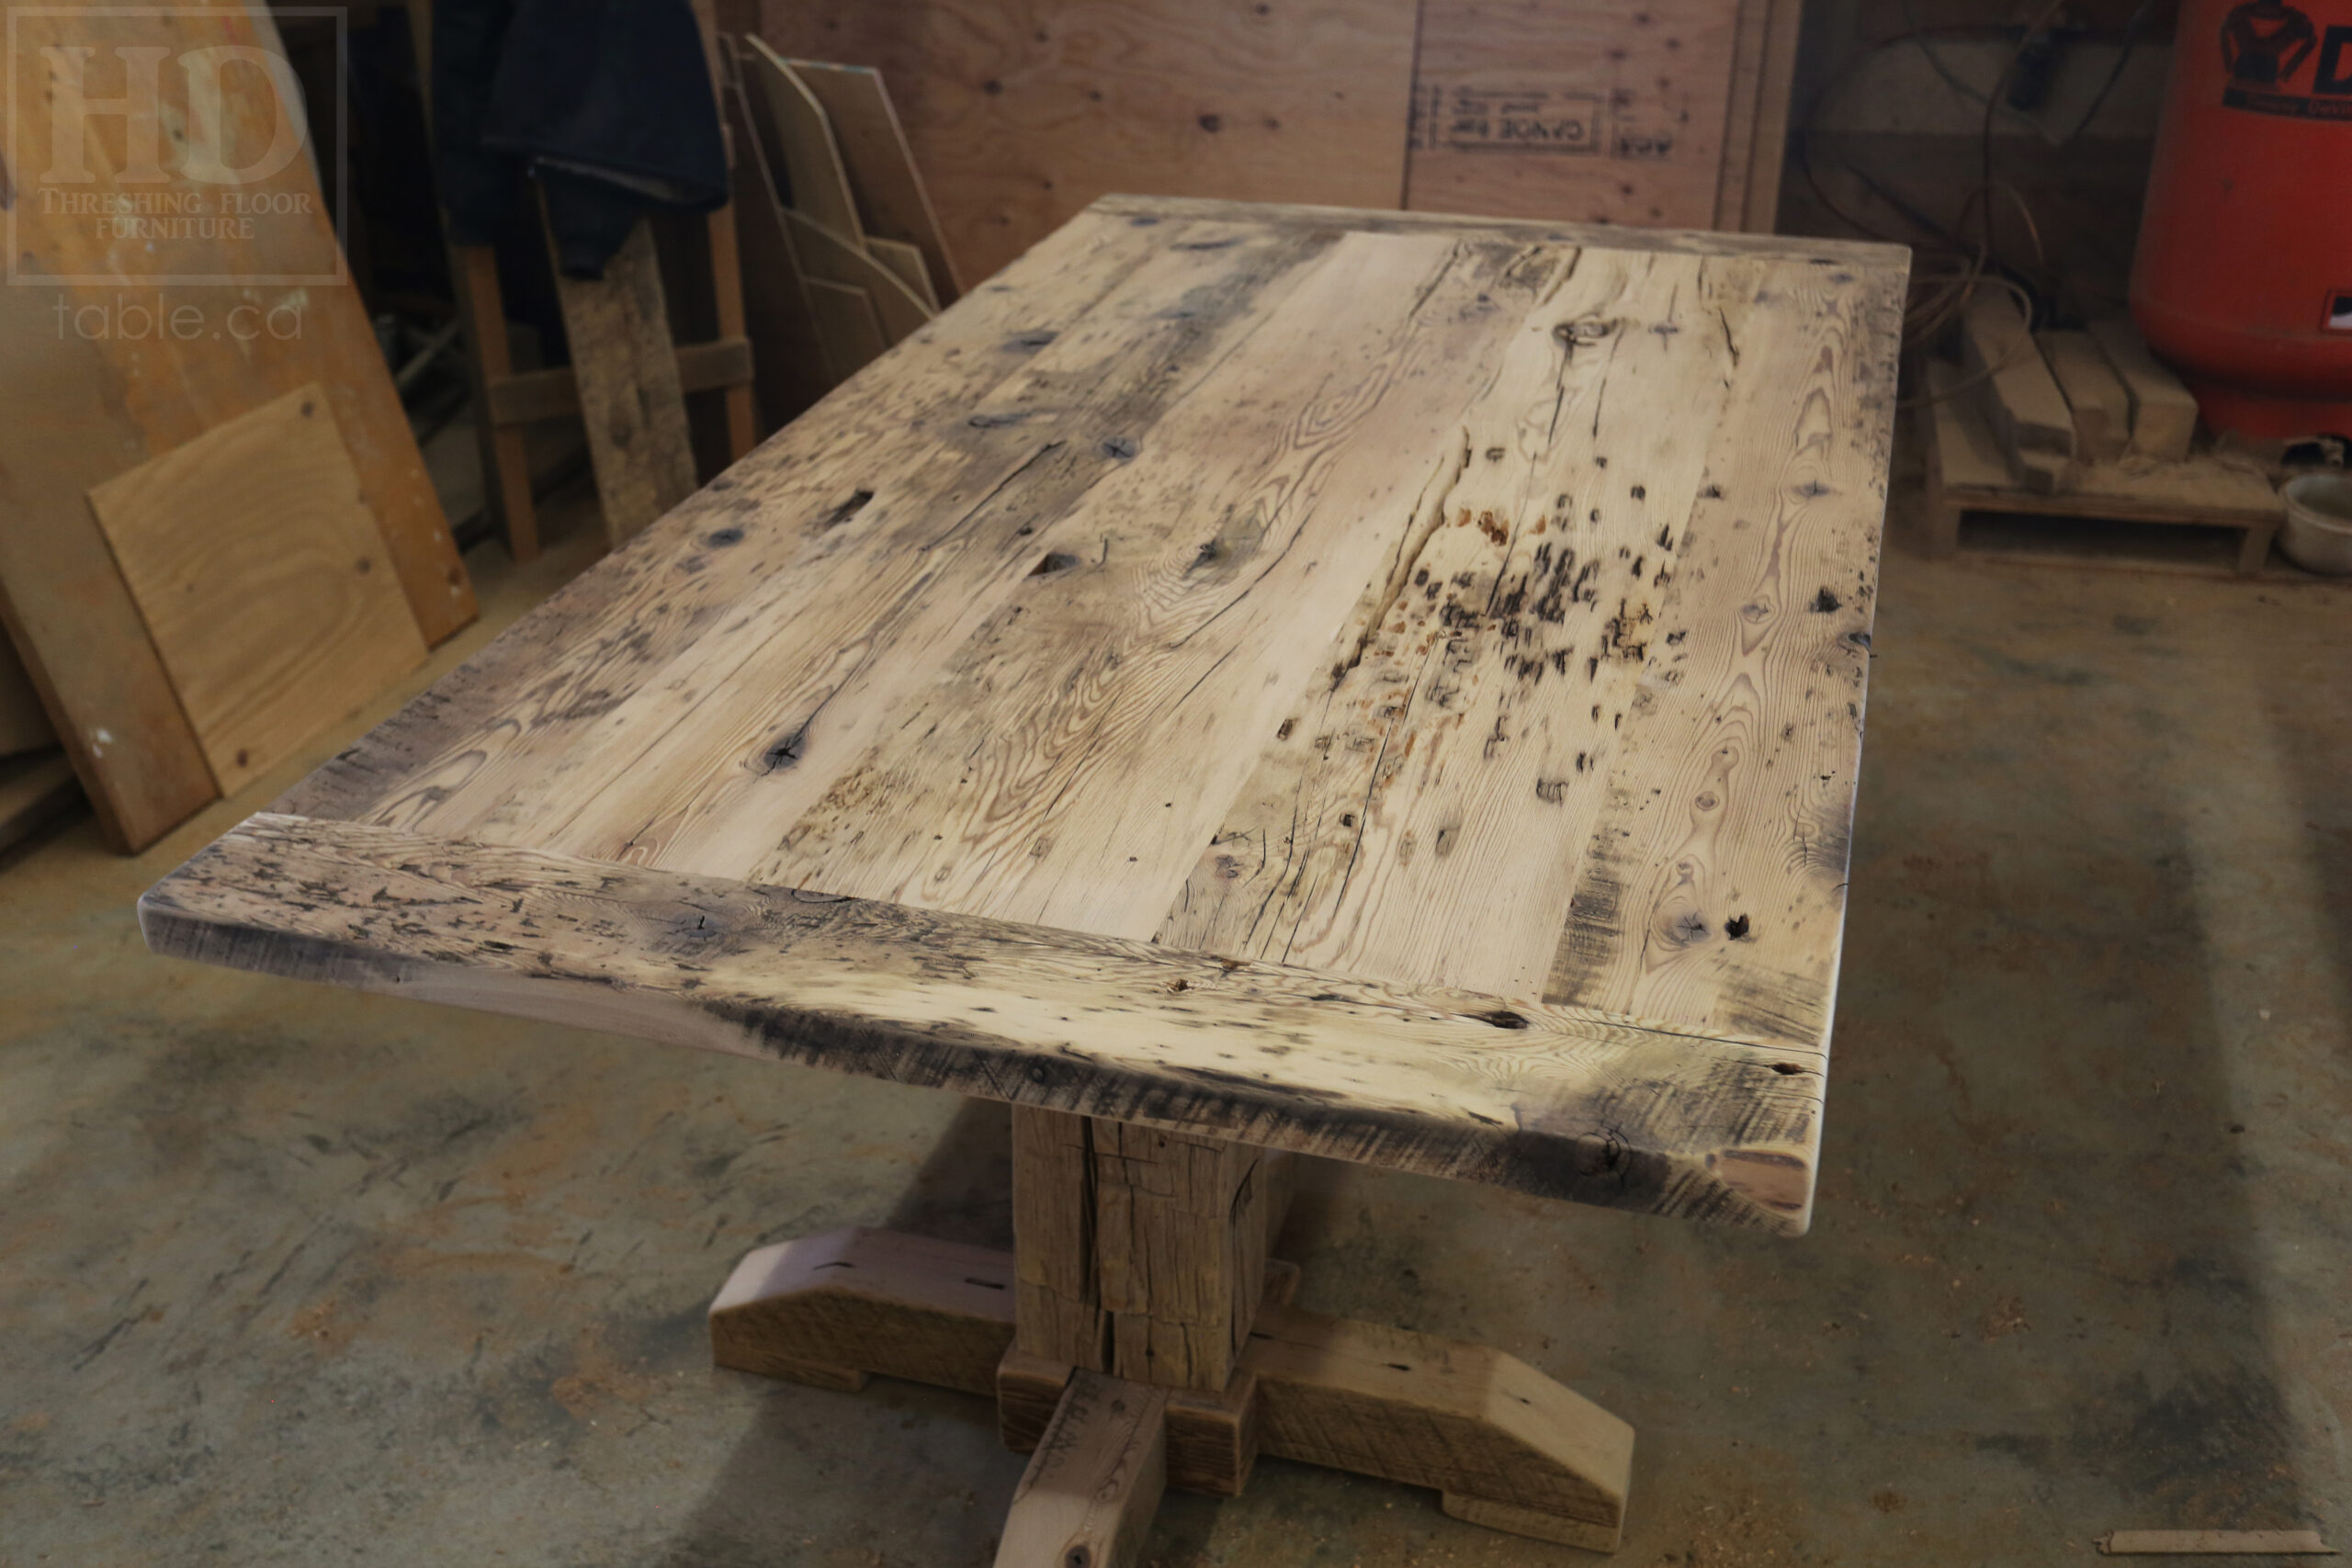 80” Reclaimed Ontario Barnwood Table we made for a Oakville, Ontario home – Double Hand Hewn Beam Posts Base  - Old Growth Hemlock Threshing Floor Construction – Original edges & distressing maintained – Bread Edge Ends - Premium epoxy + satin polyurethane finish - www.table.ca